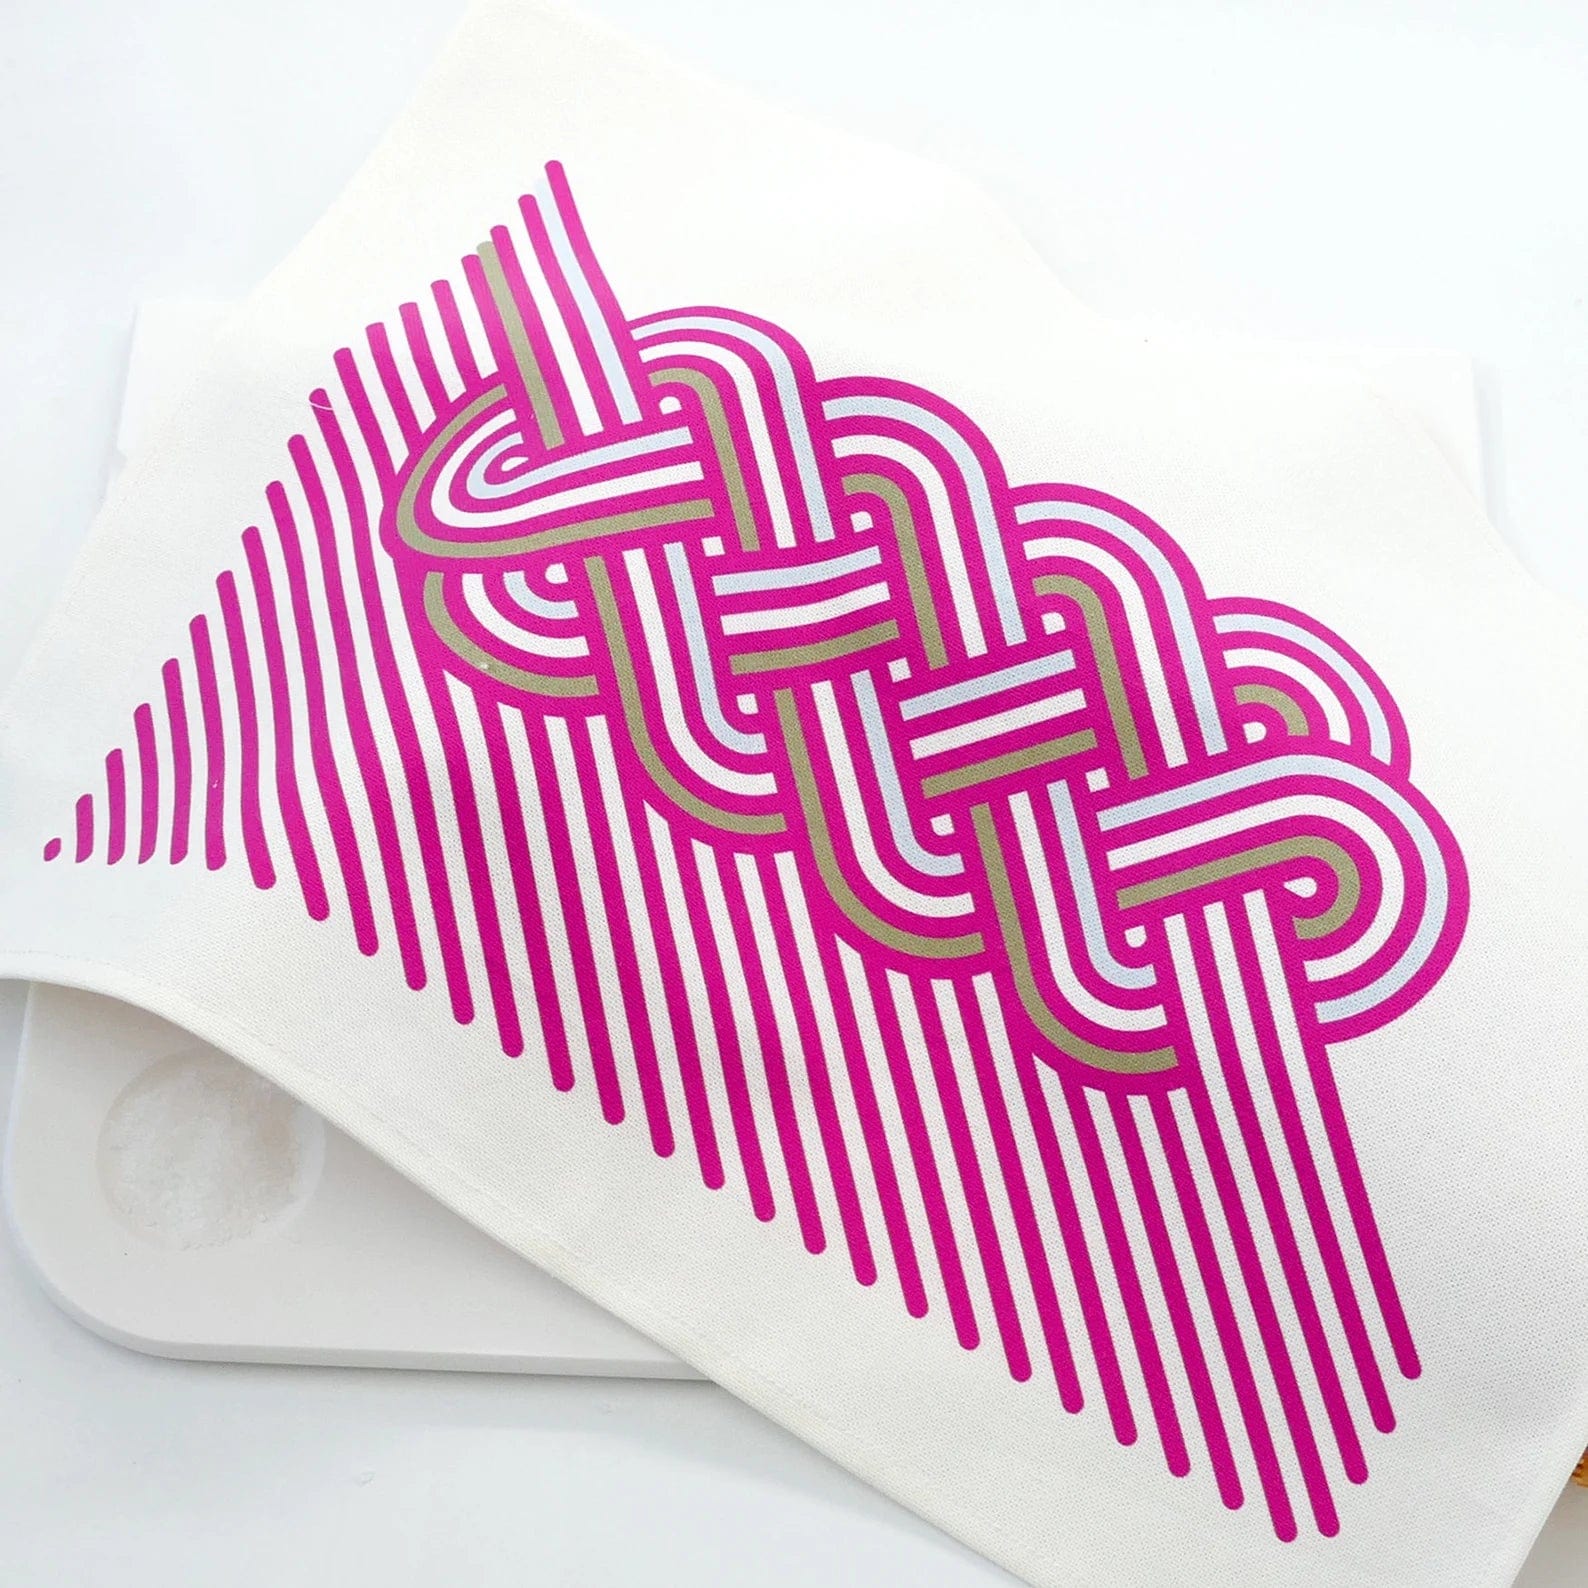 Studio Armadillo Challah Accessories Op-Art Cotton Challah Cover - Pink, Khaki and Light Blue